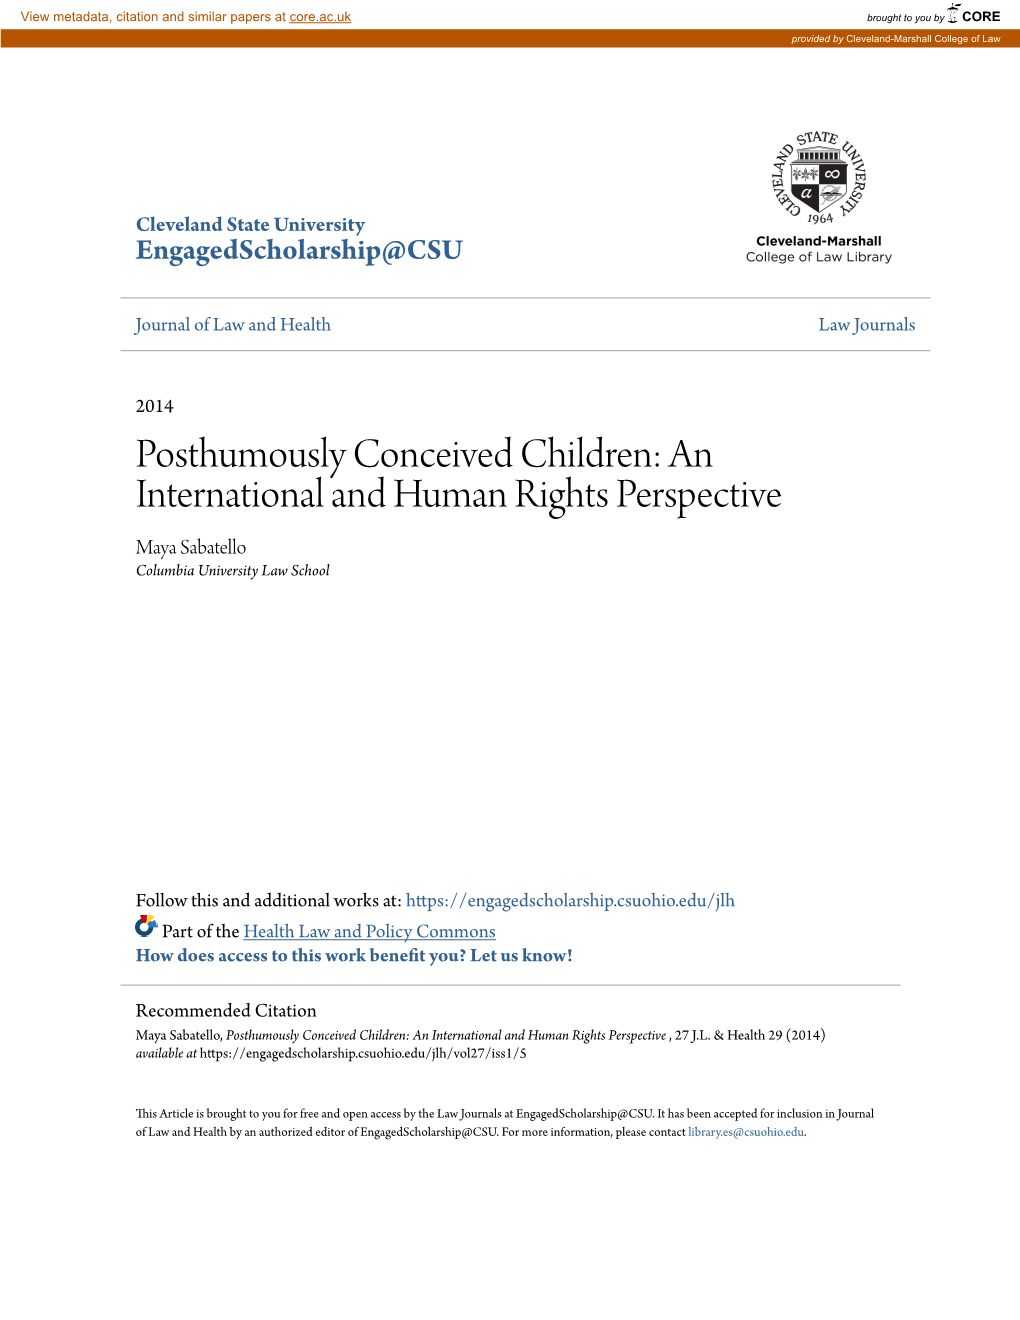 Posthumously Conceived Children: an International and Human Rights Perspective Maya Sabatello Columbia University Law School